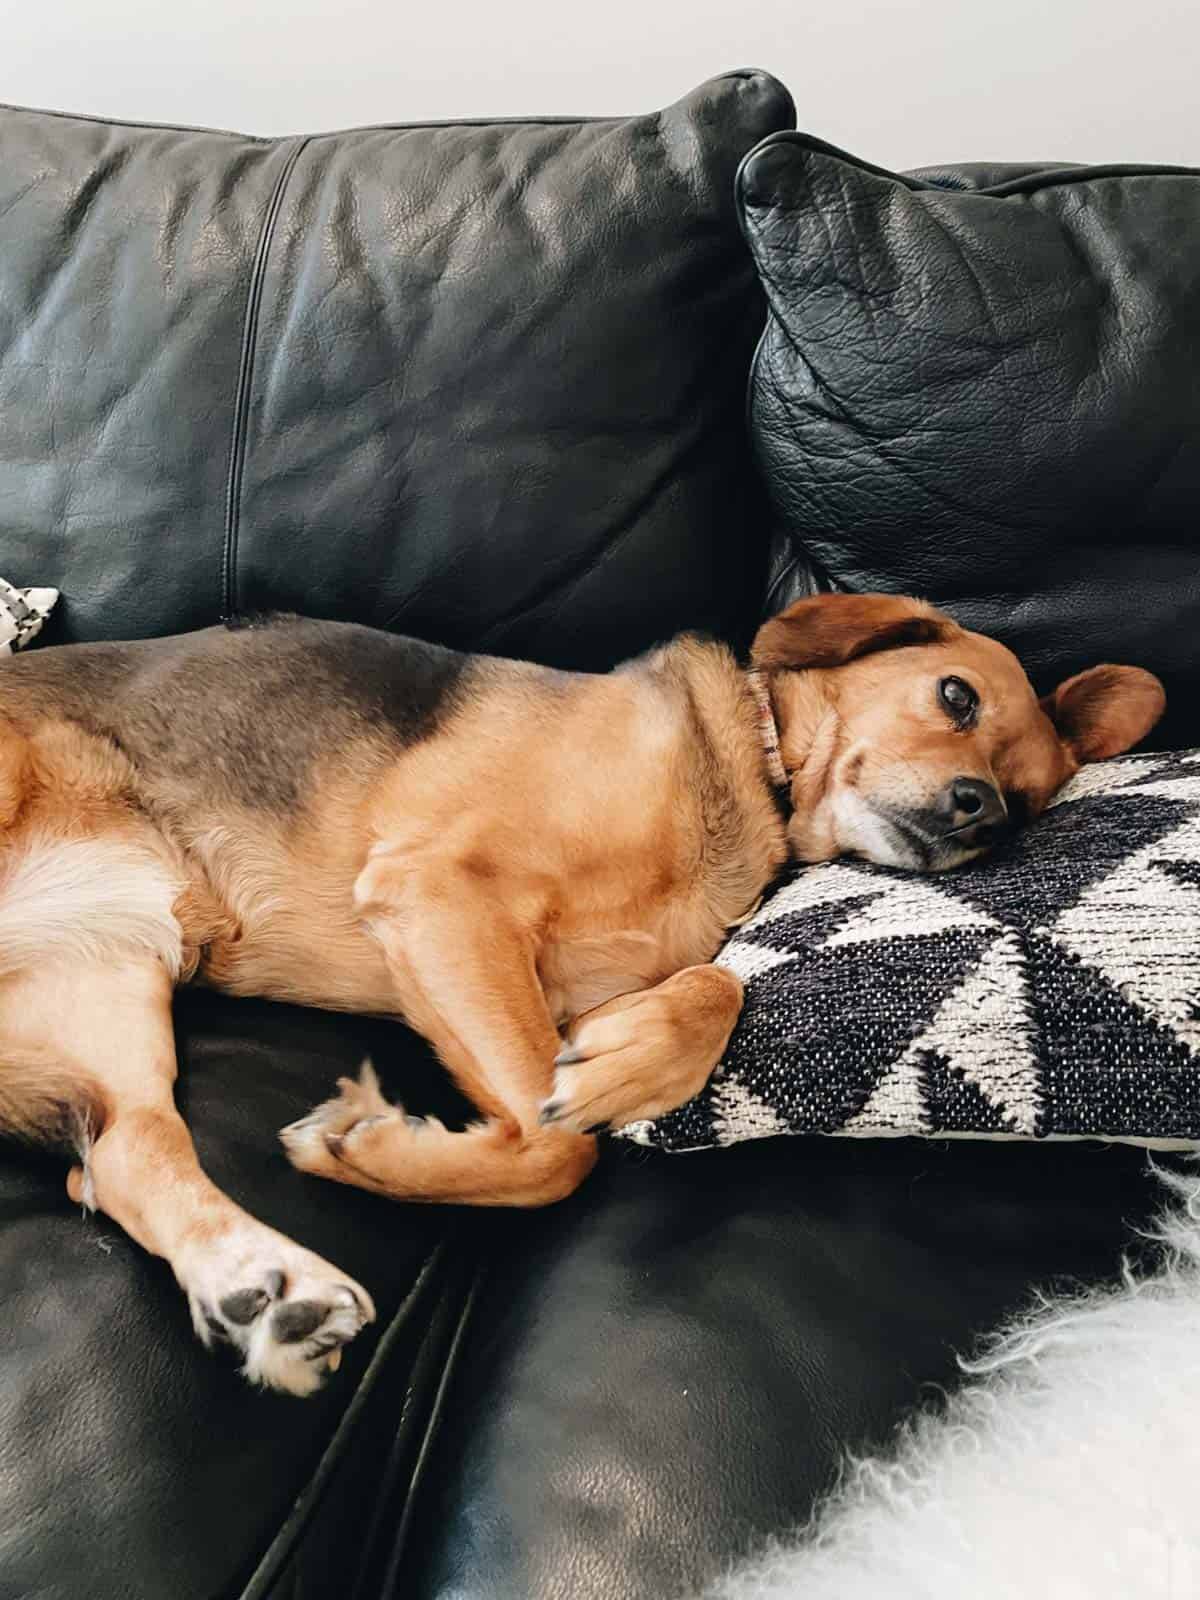 A brown dog, its head on a pillow, relaxes on a black couch.